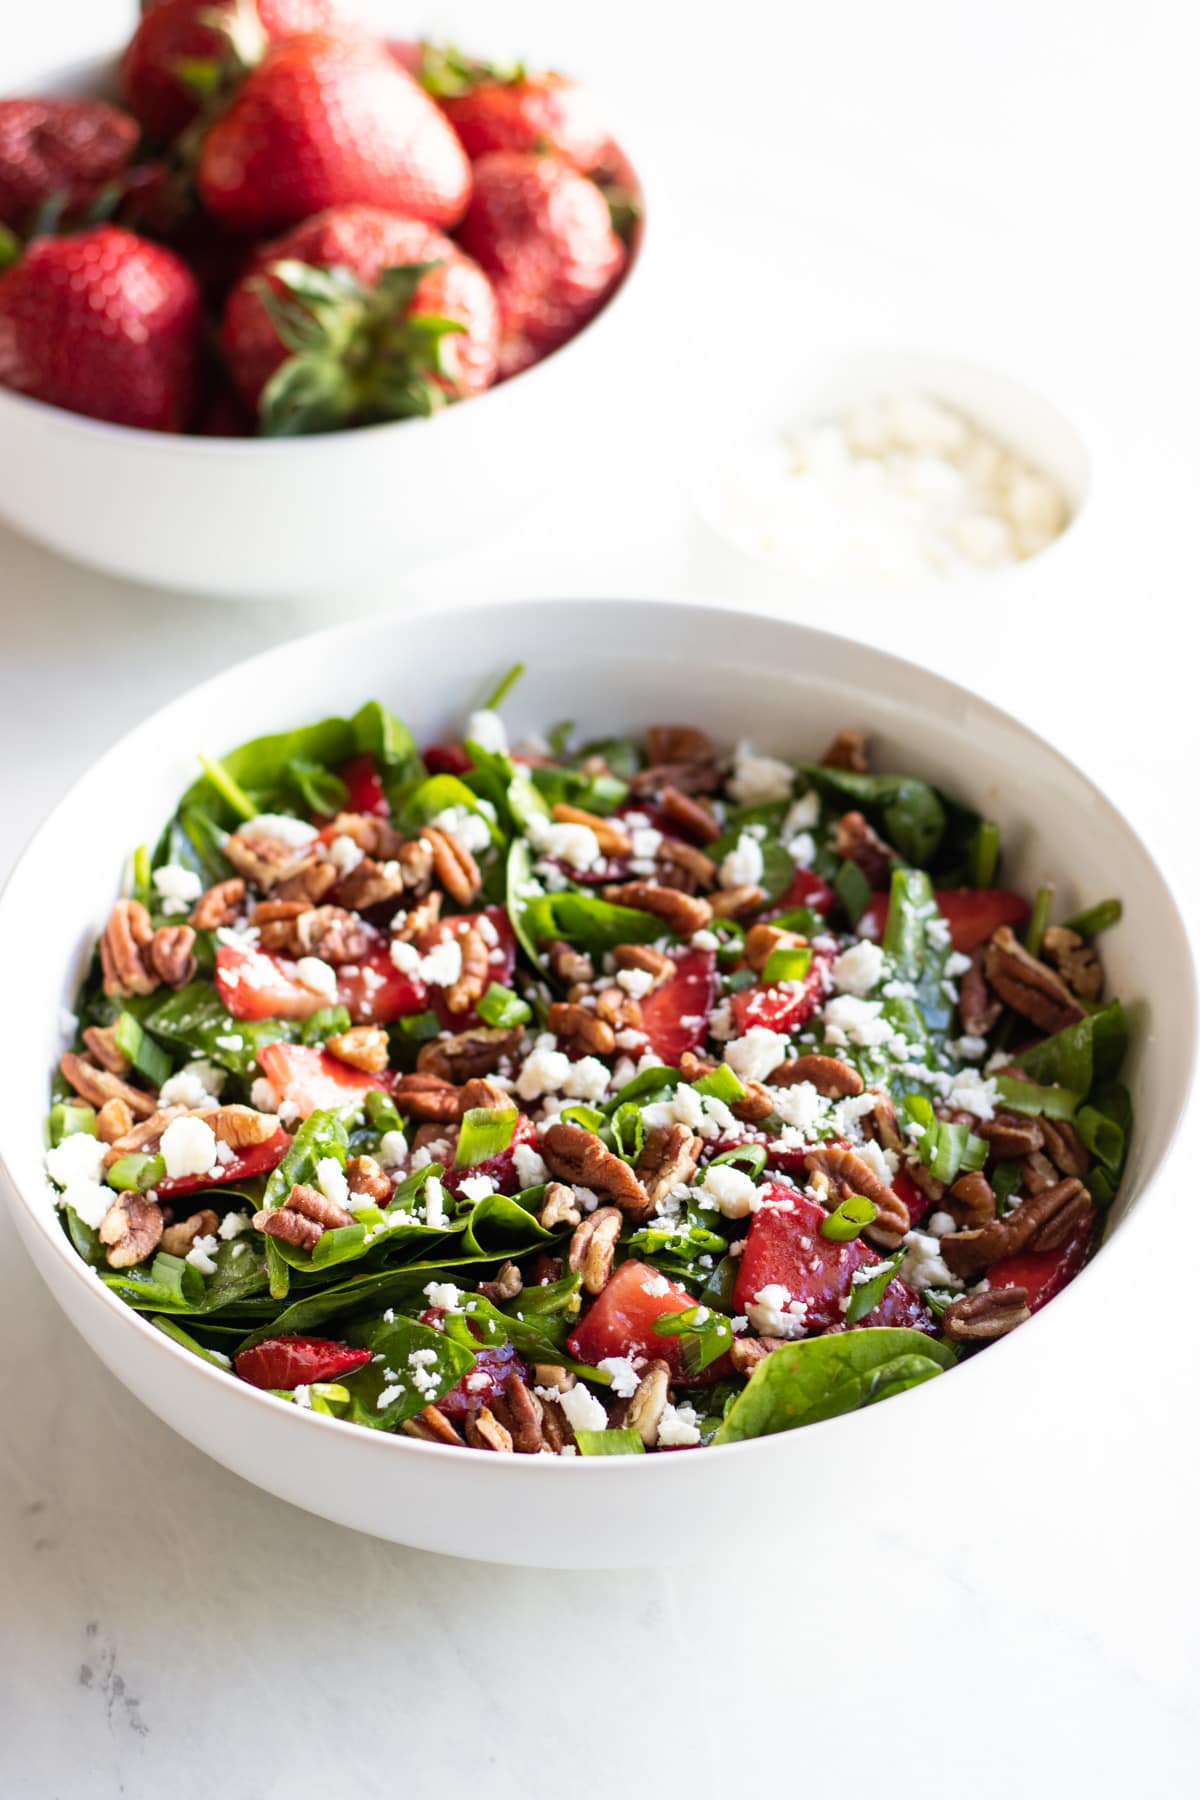 A bowl of spinach salad surrounded by smaller bowls of juicy strawberries and crumbled feta cheese.